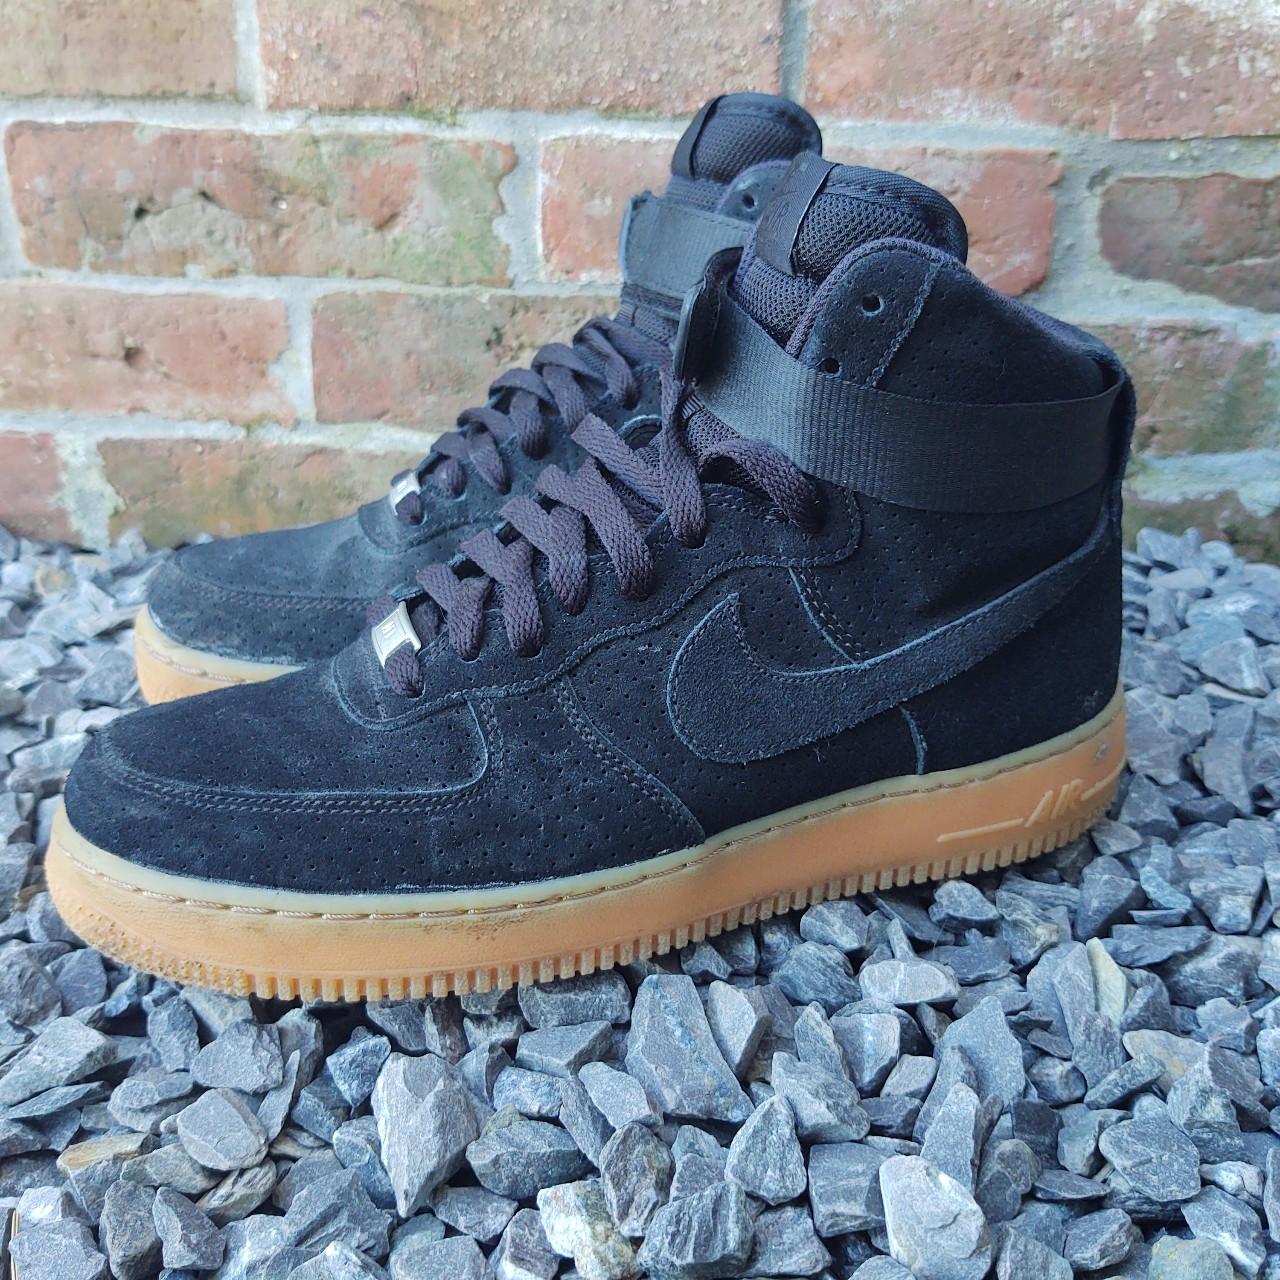 Nike Air Force 1 High Black Suede Gum bottoms shoes size 9